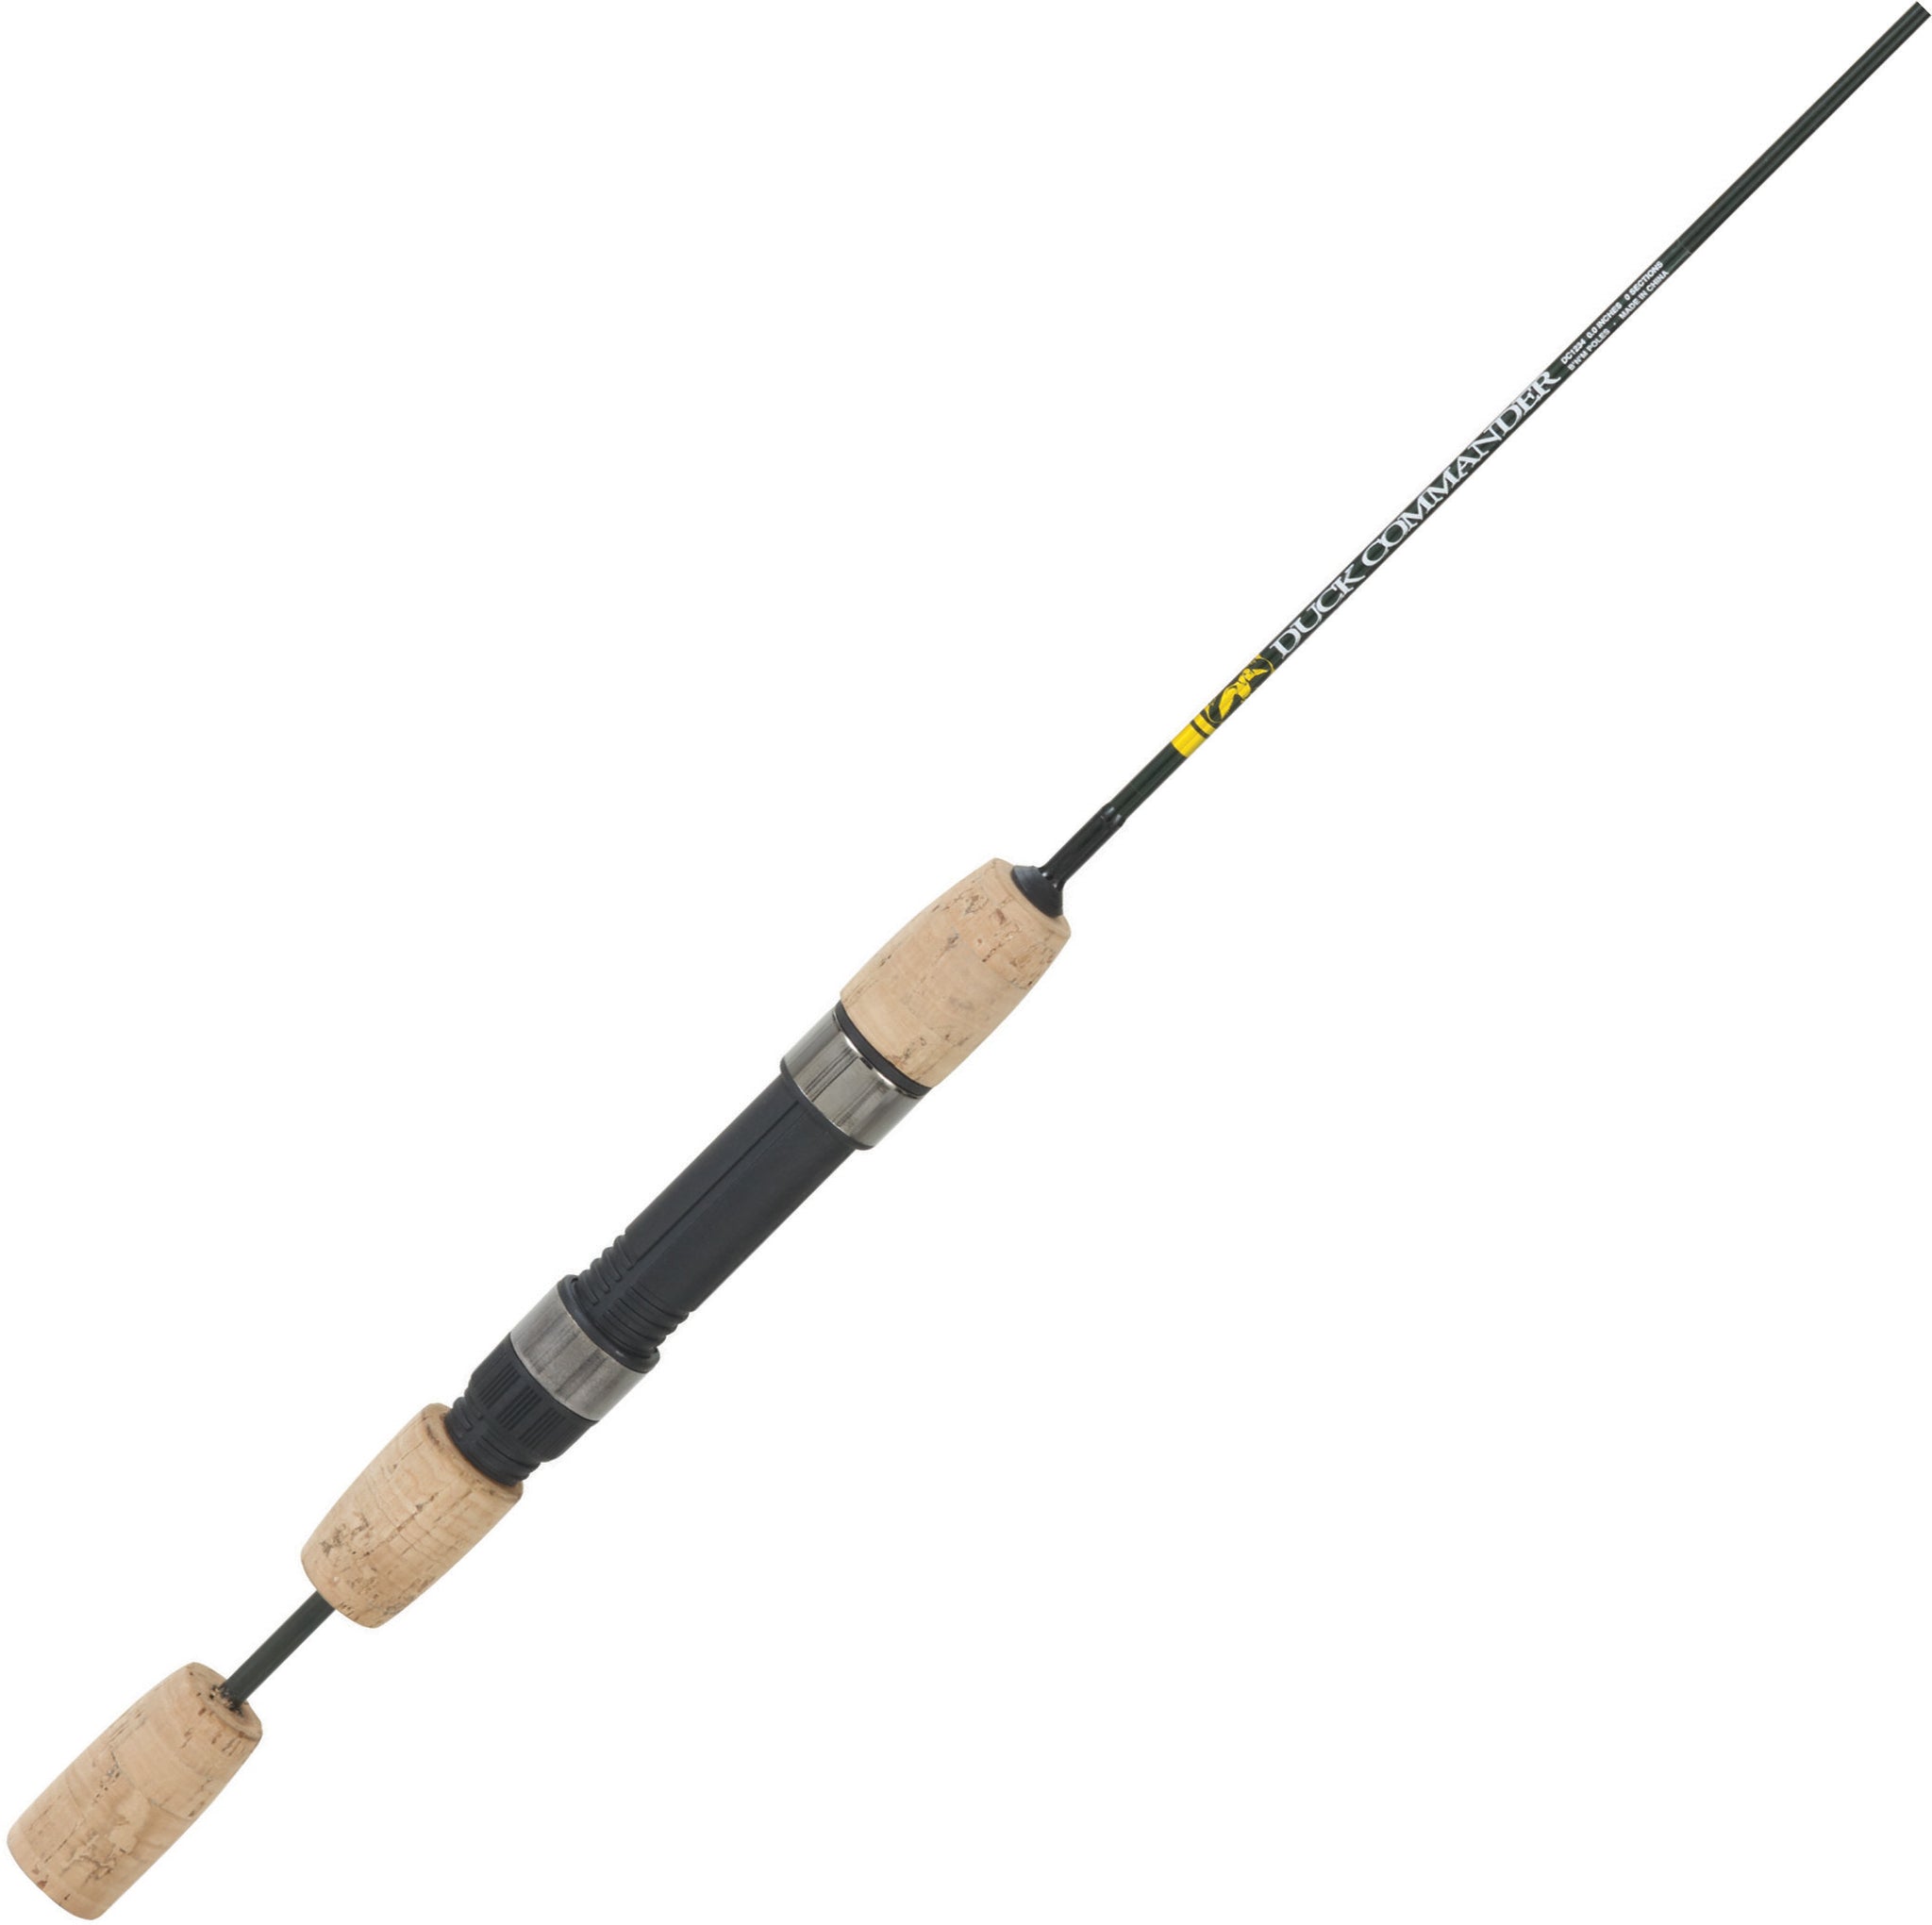 The Crappie Jack Combo B'n'M Pole Company, 48% OFF